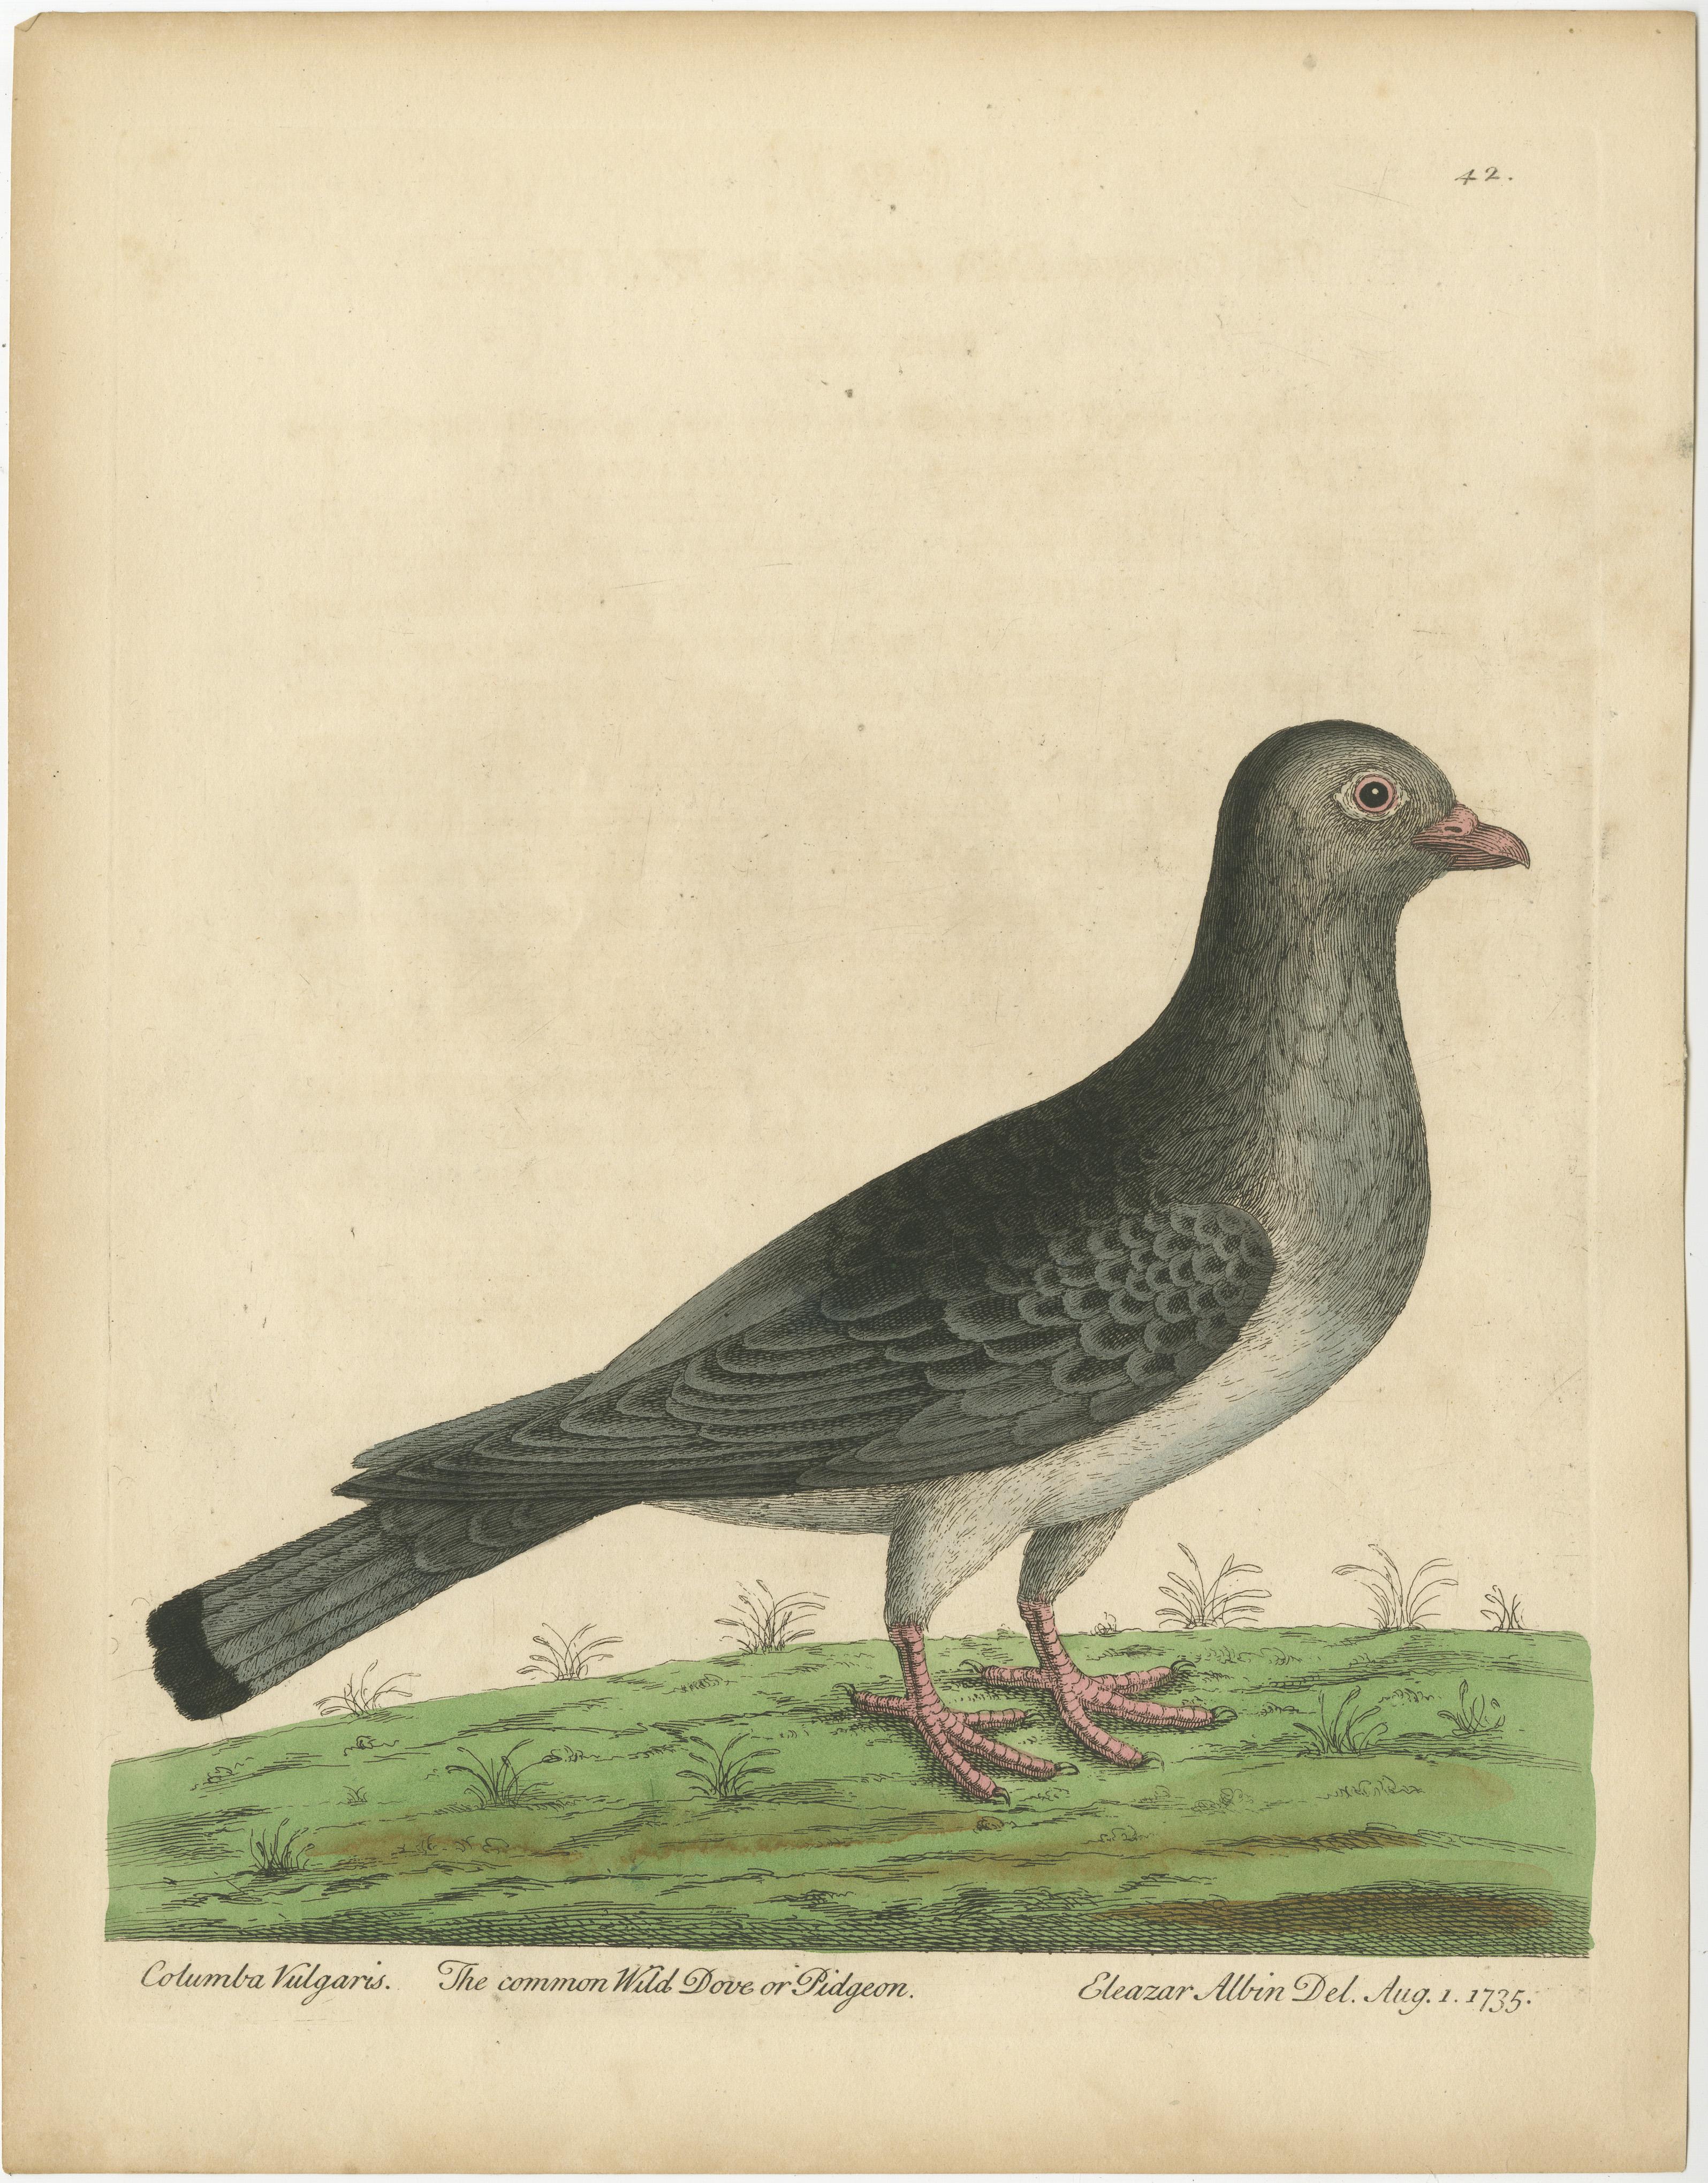 Antique bird print titled 'Columba Vulgaris. The Common Wild Dove or Pidgeon'. Original antique print of a common pigeon. This print originates from 'A Supplement to the Natural History of Birds illustrated with an Hundred and One Copper Plates